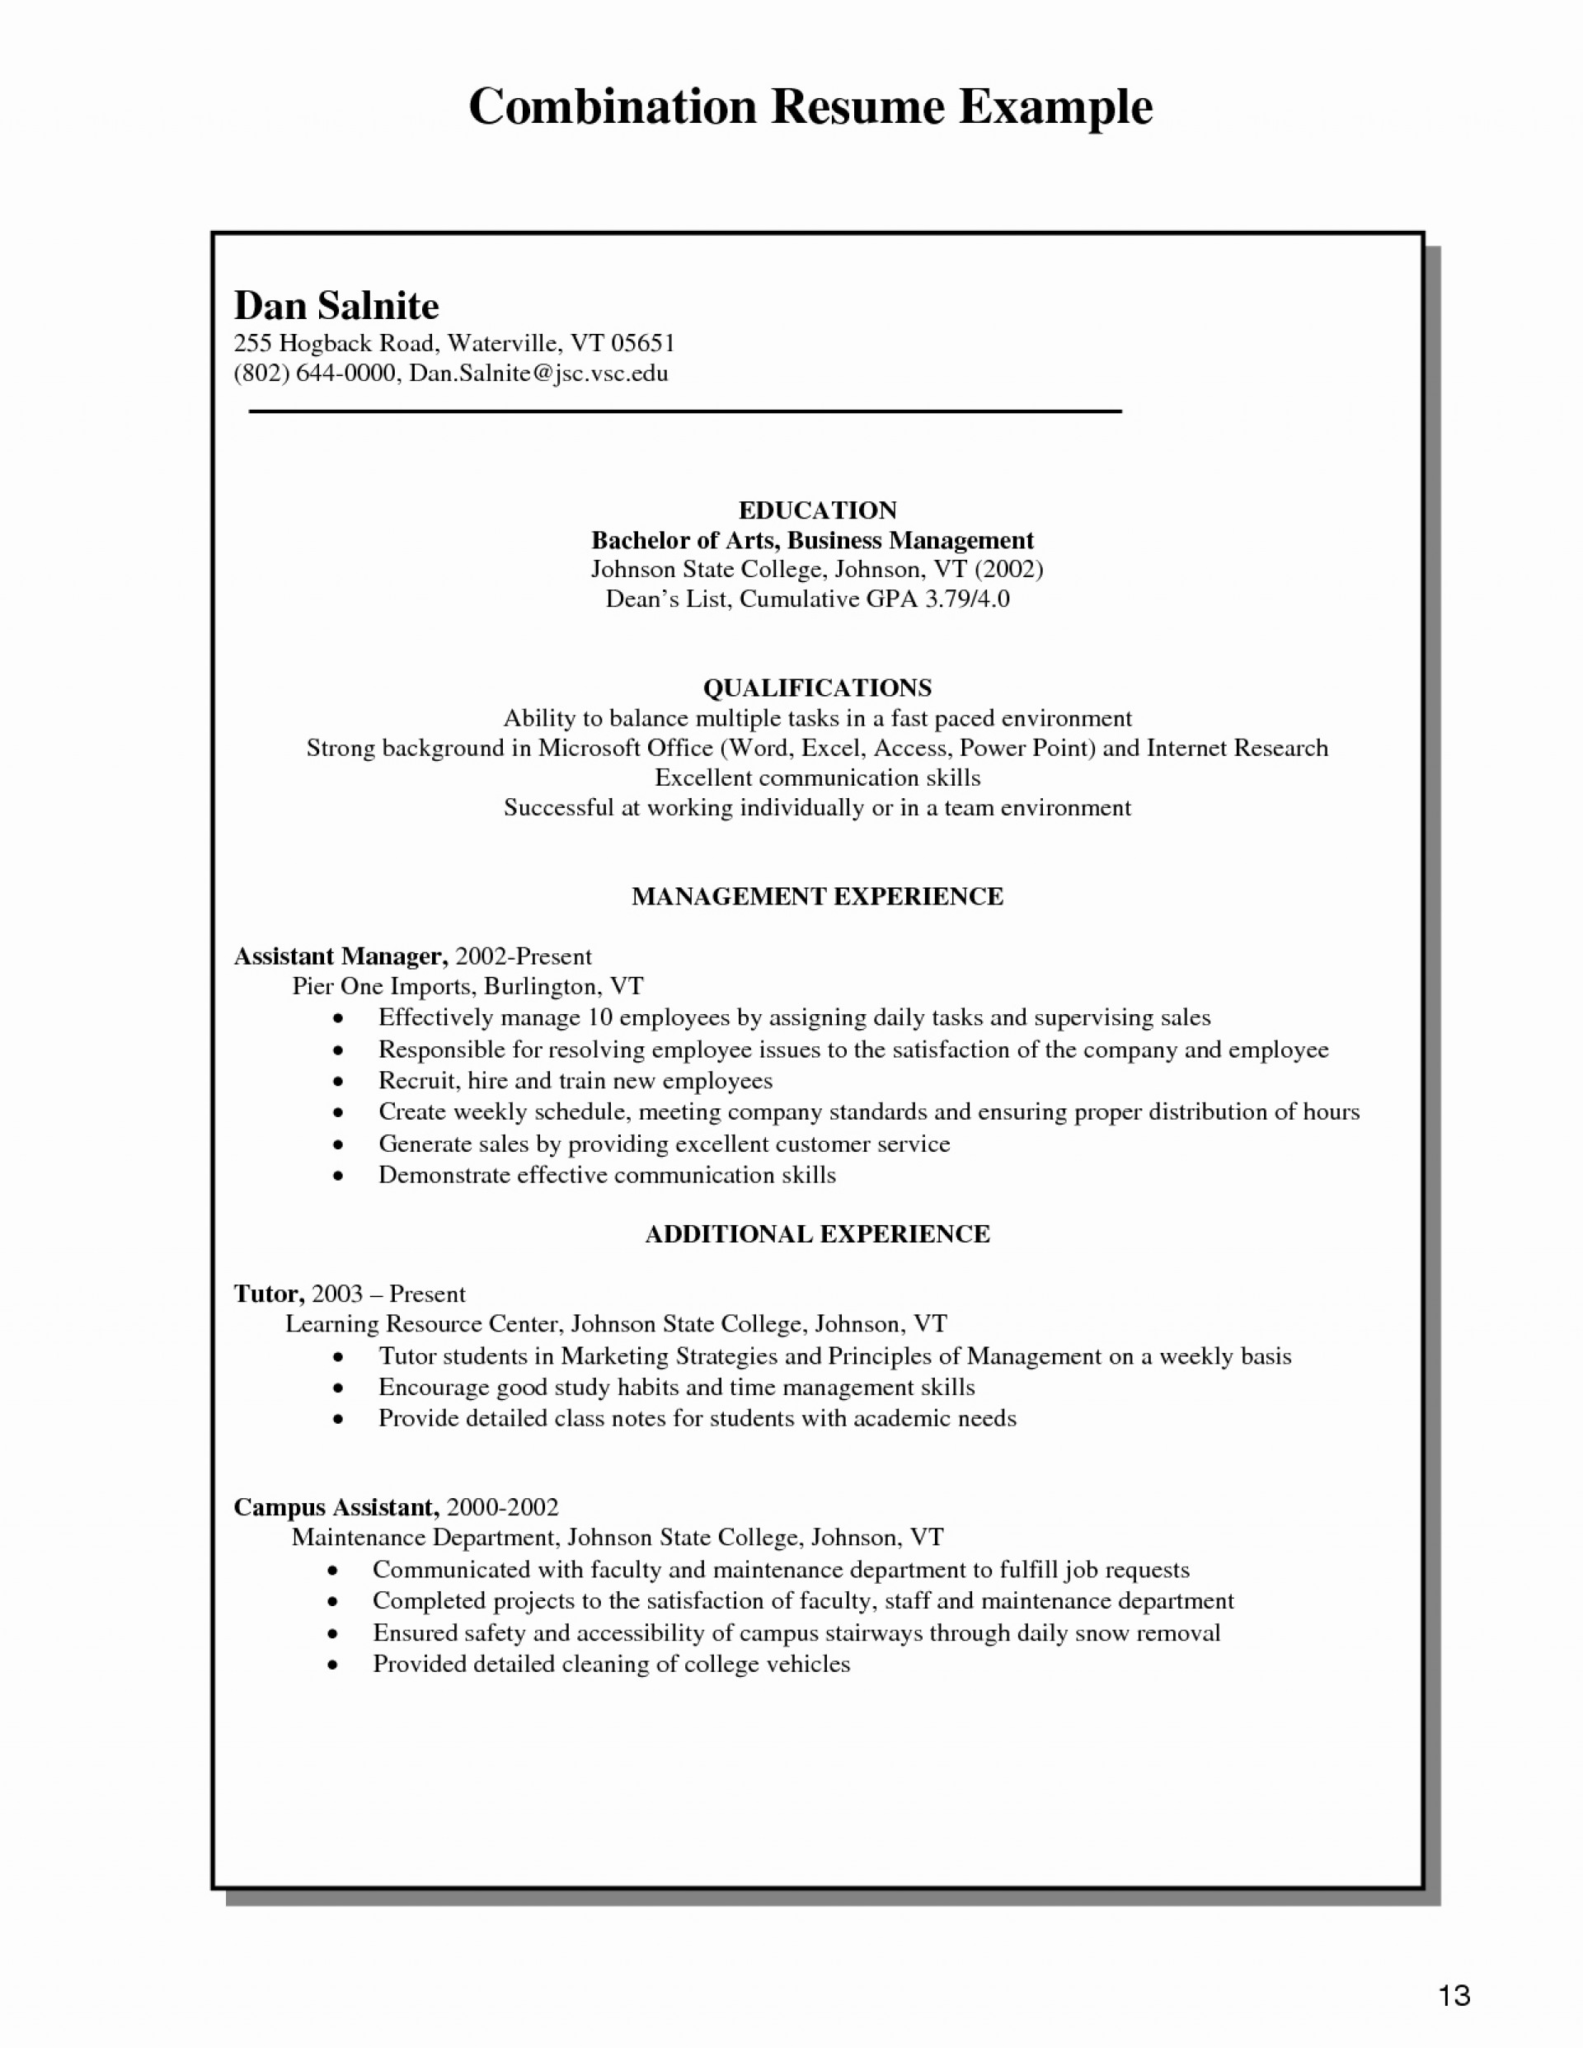 Combination Resume Template Word Professional Template